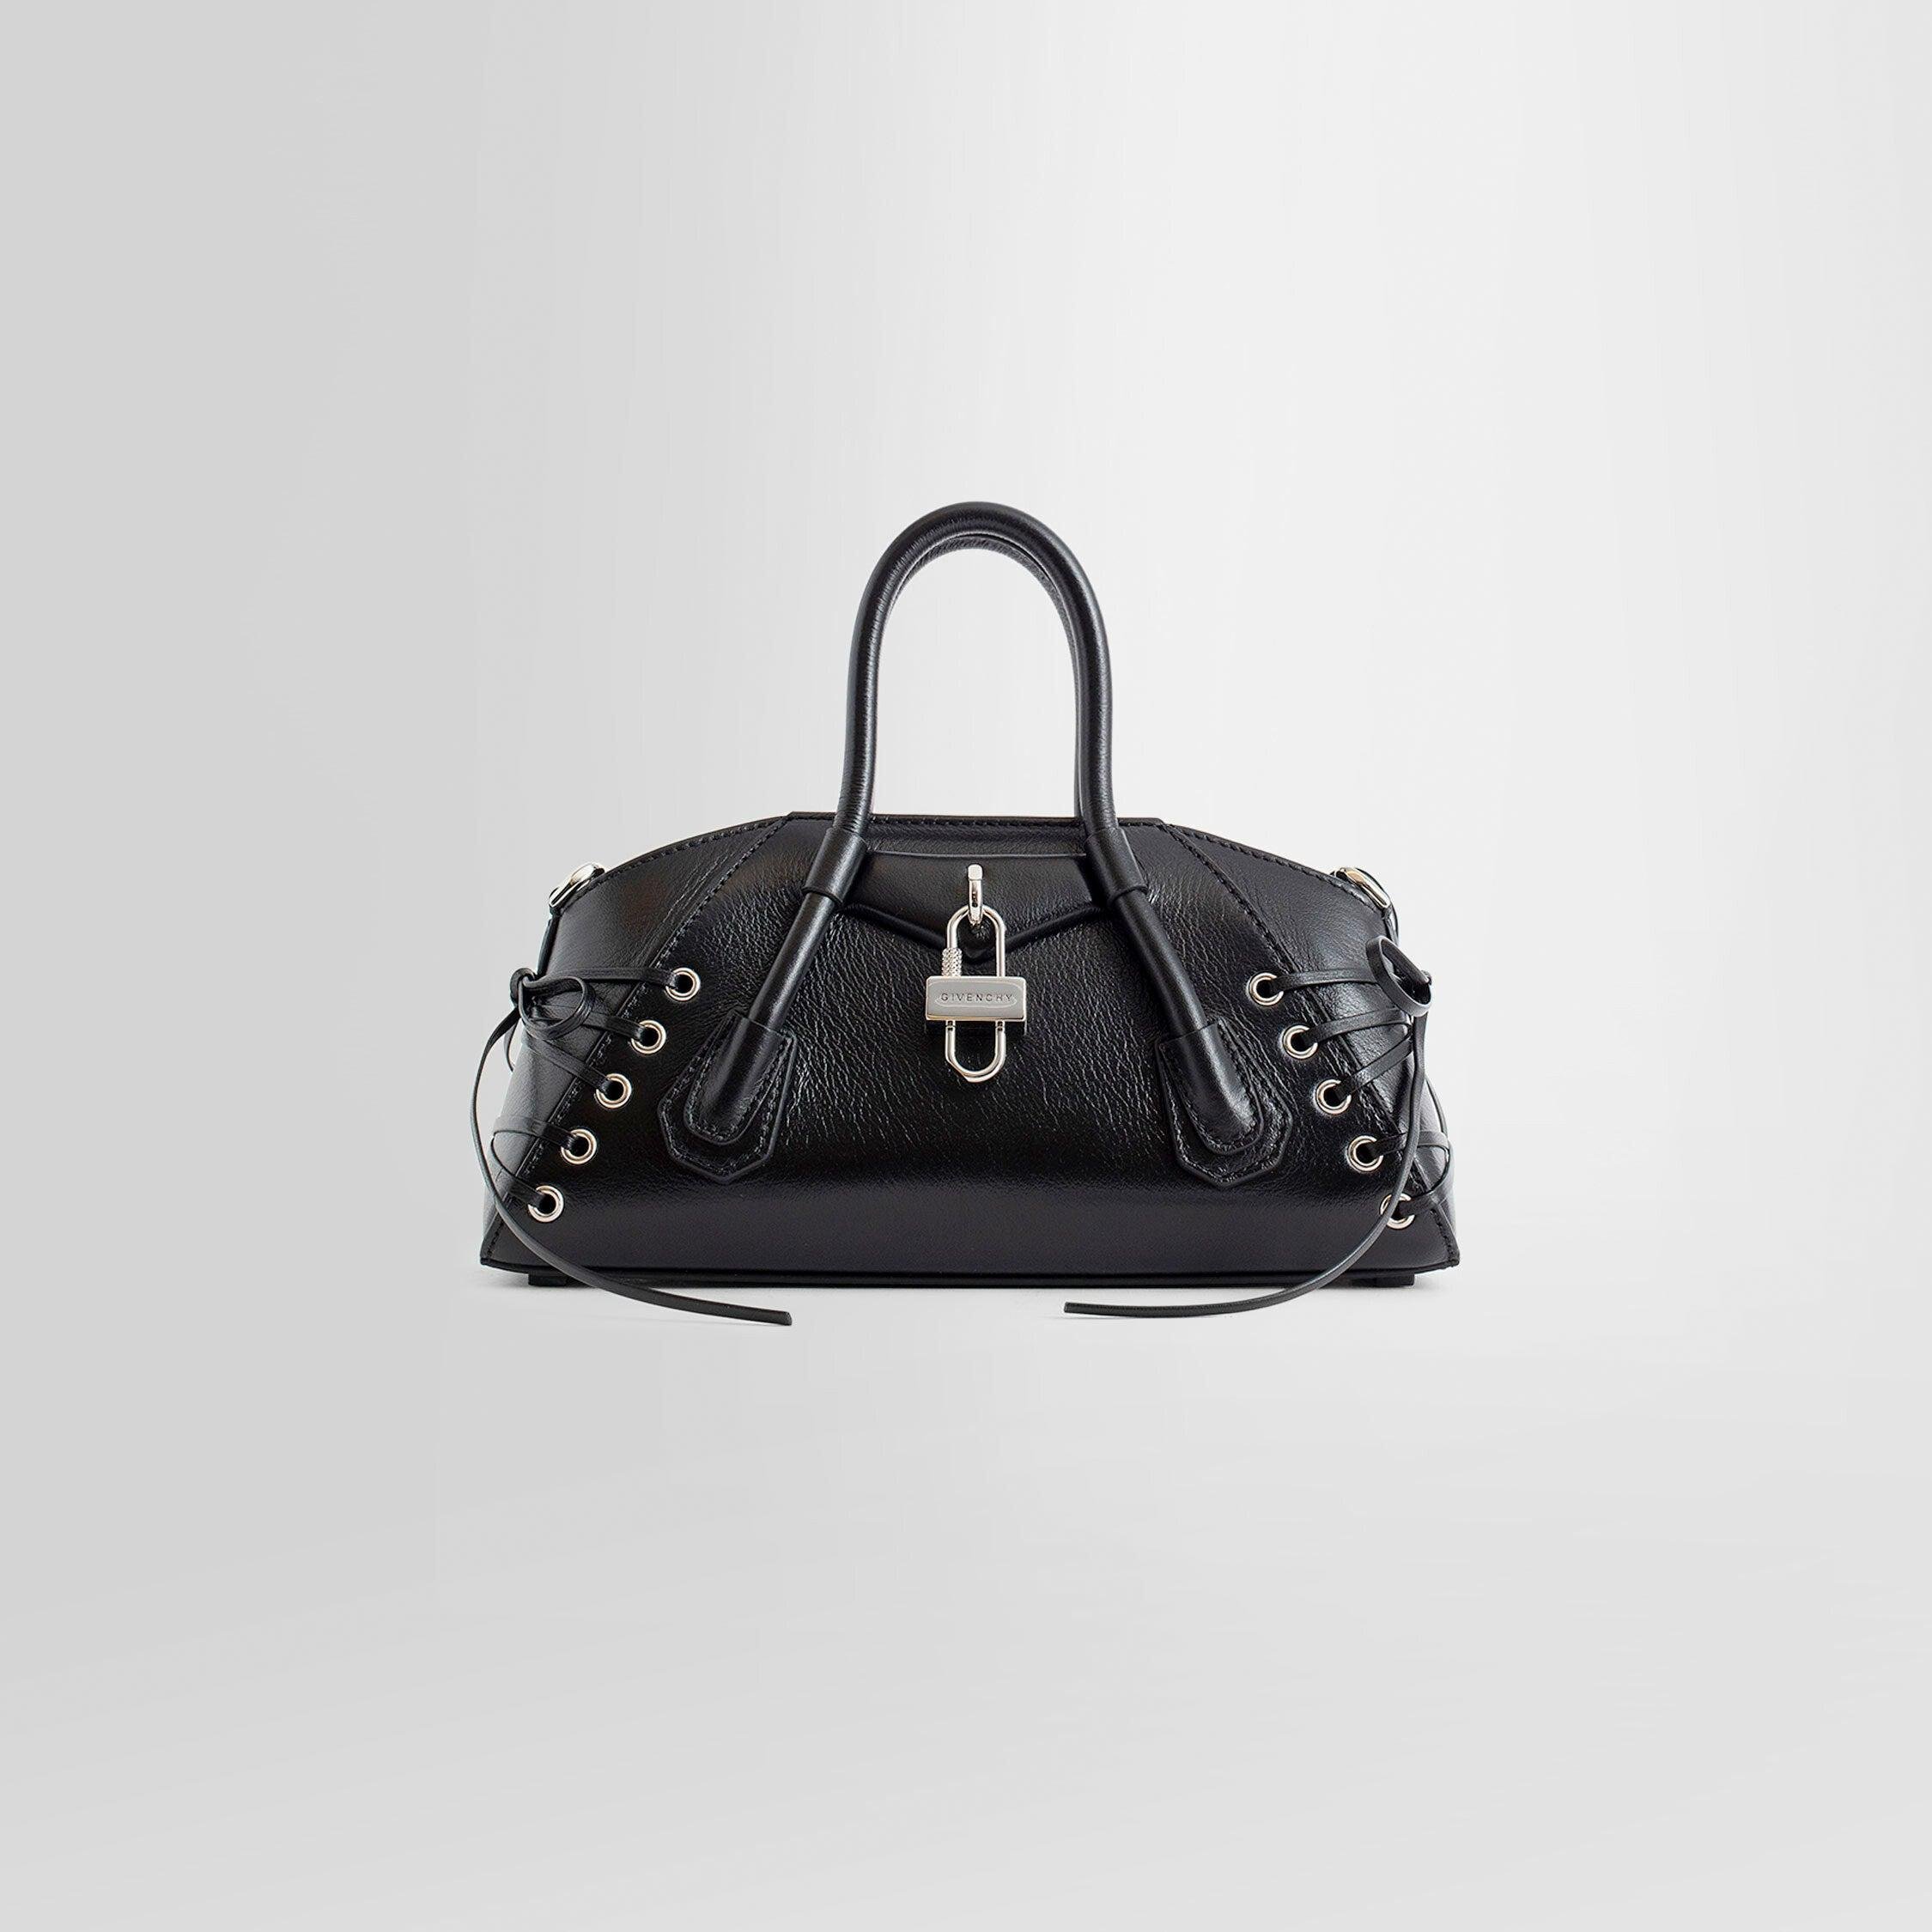 GIVENCHY WOMAN BLACK TOP HANDLE BAGS by GIVENCHY